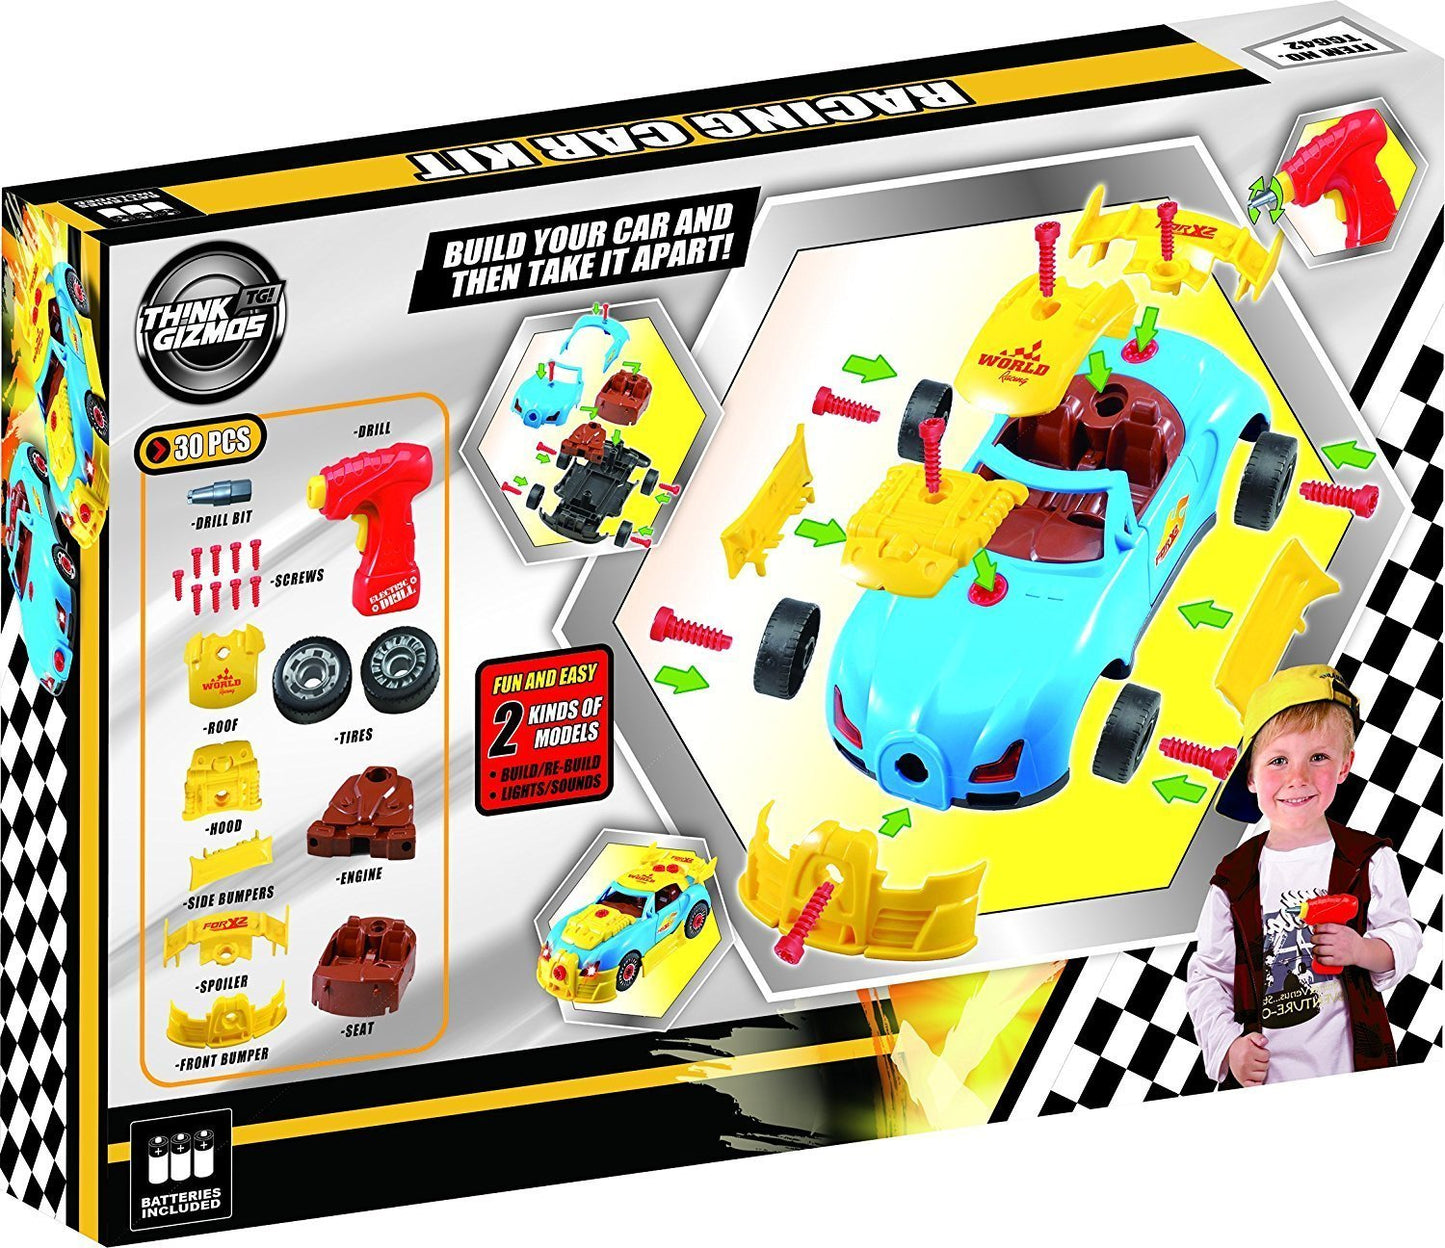 Think Gizmos Take Apart Toy Racing Car - Construction Toy Kit for Boys and Girls Aged 3 4 5 6 7 8 - Build Your Own Car Kit Updated Version 3 Exclusive to